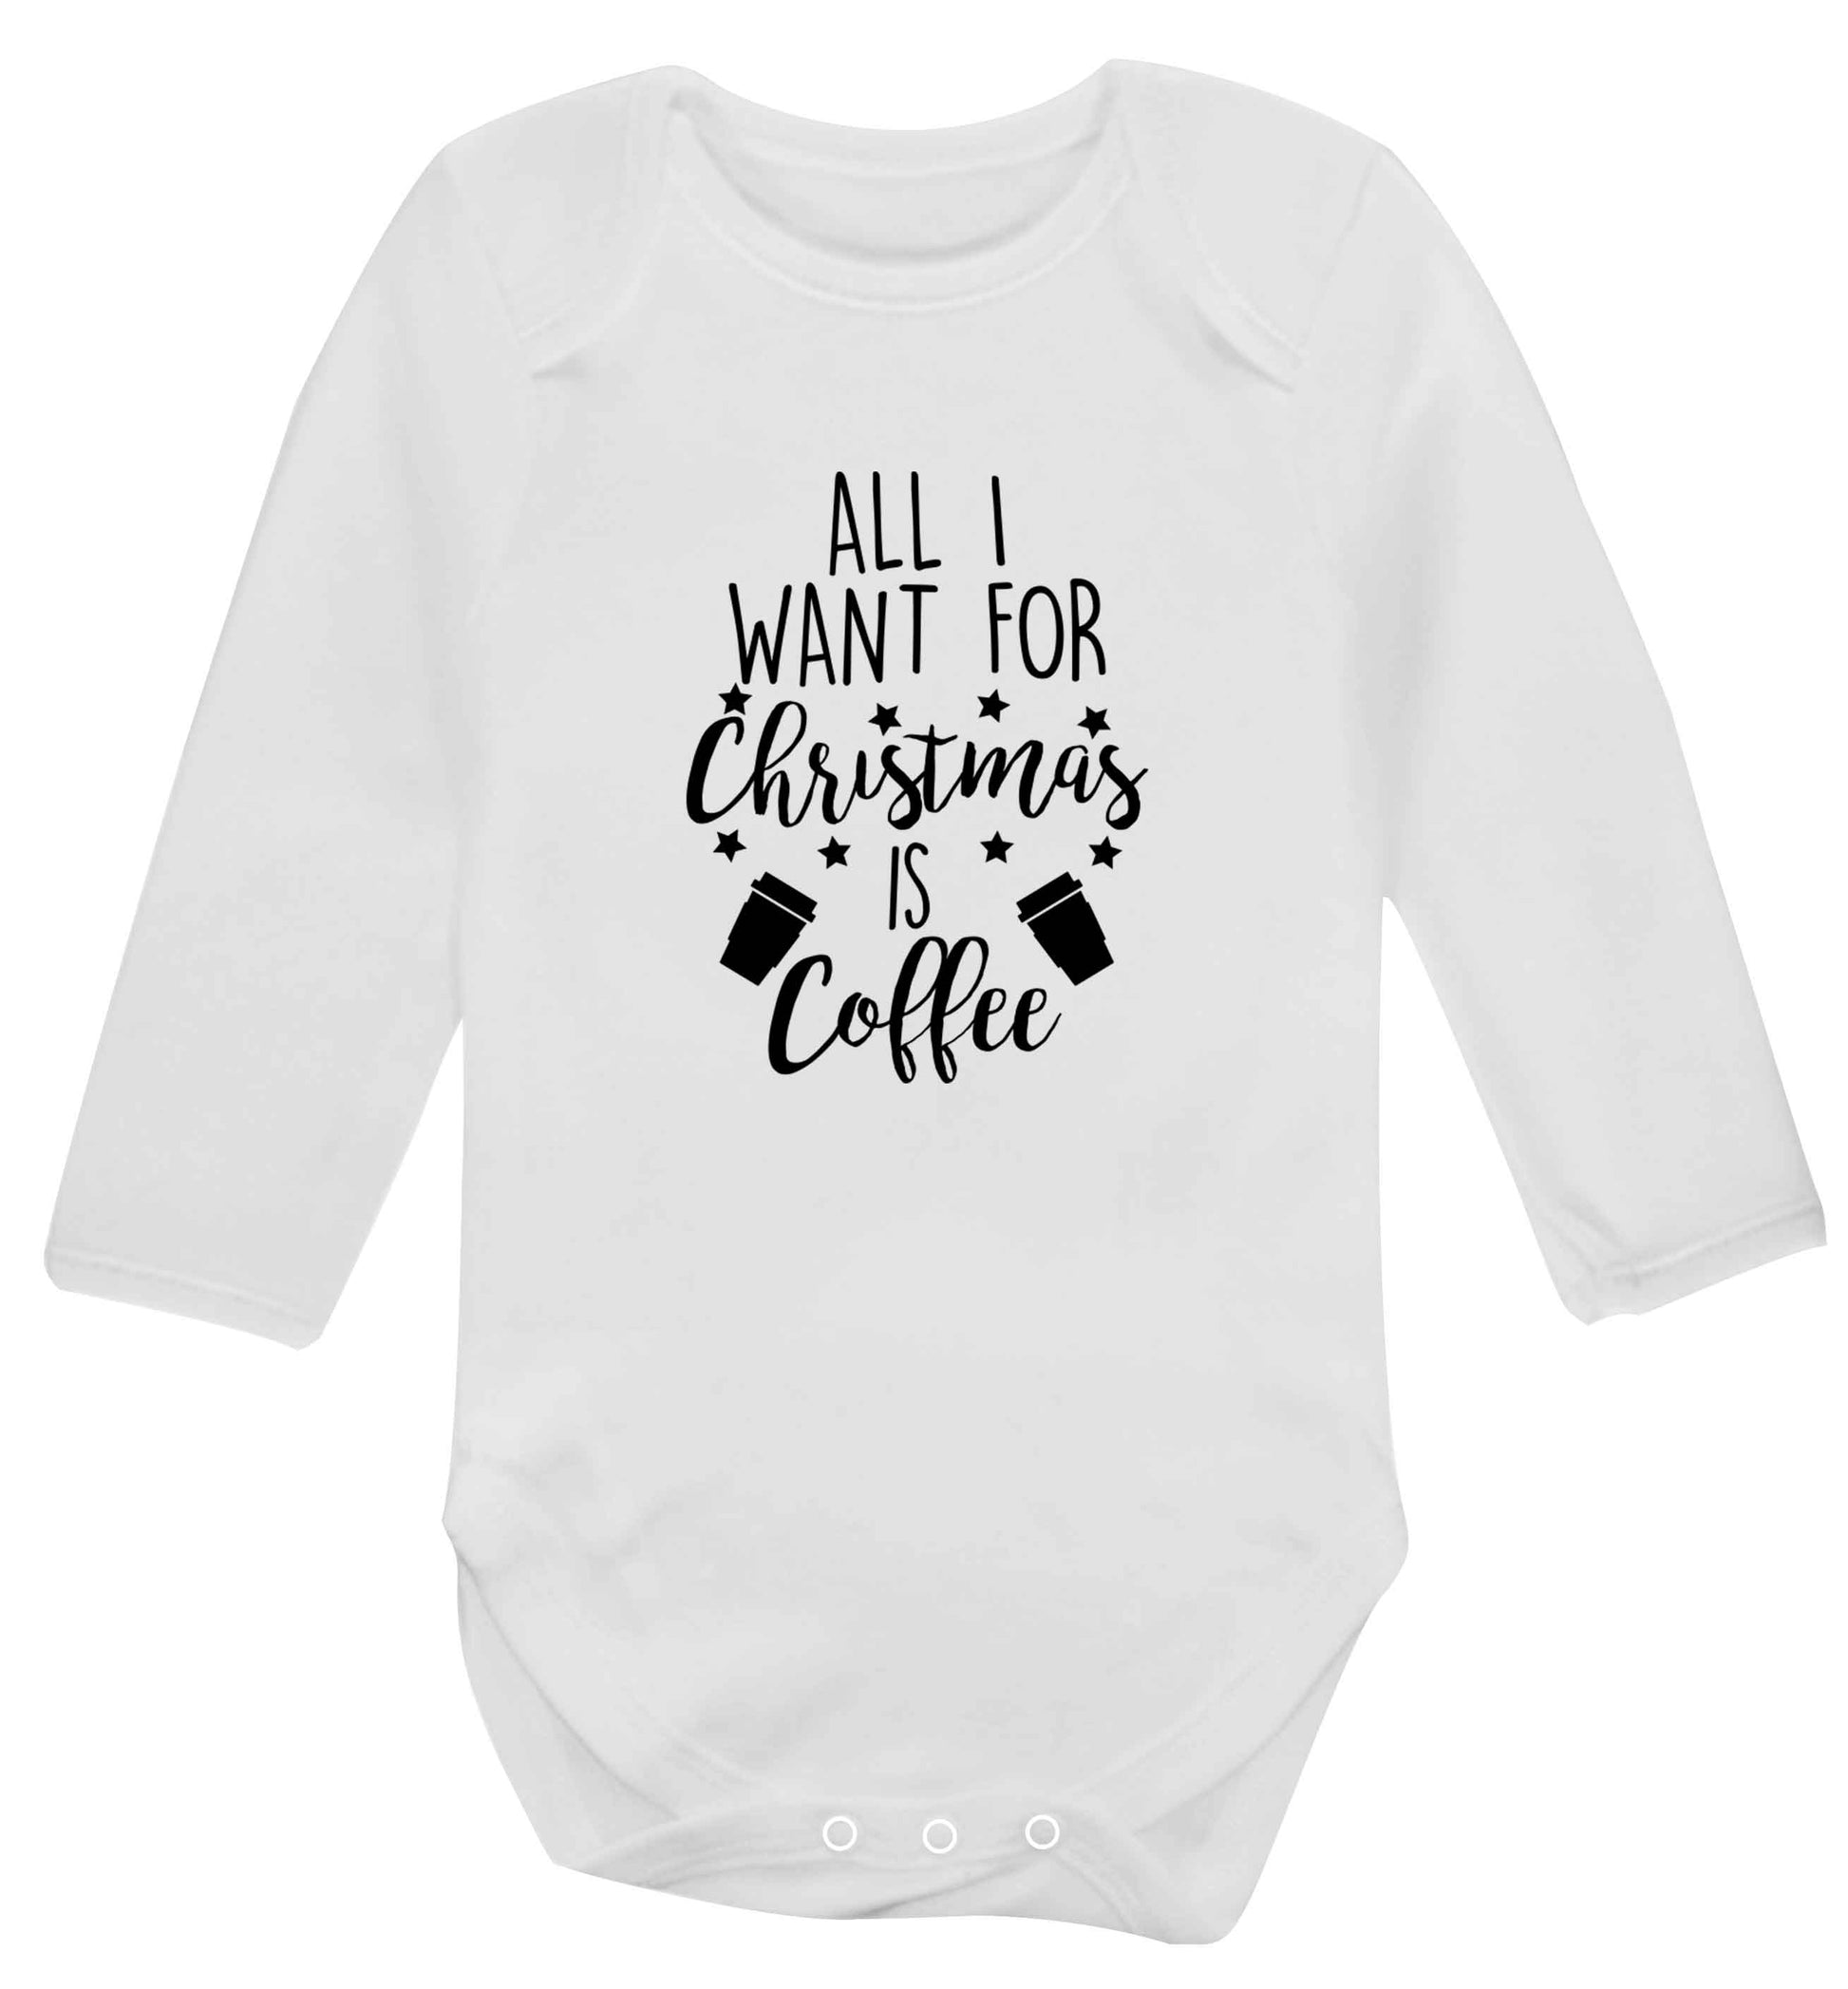 All I want for Christmas is coffee Baby Vest long sleeved white 6-12 months